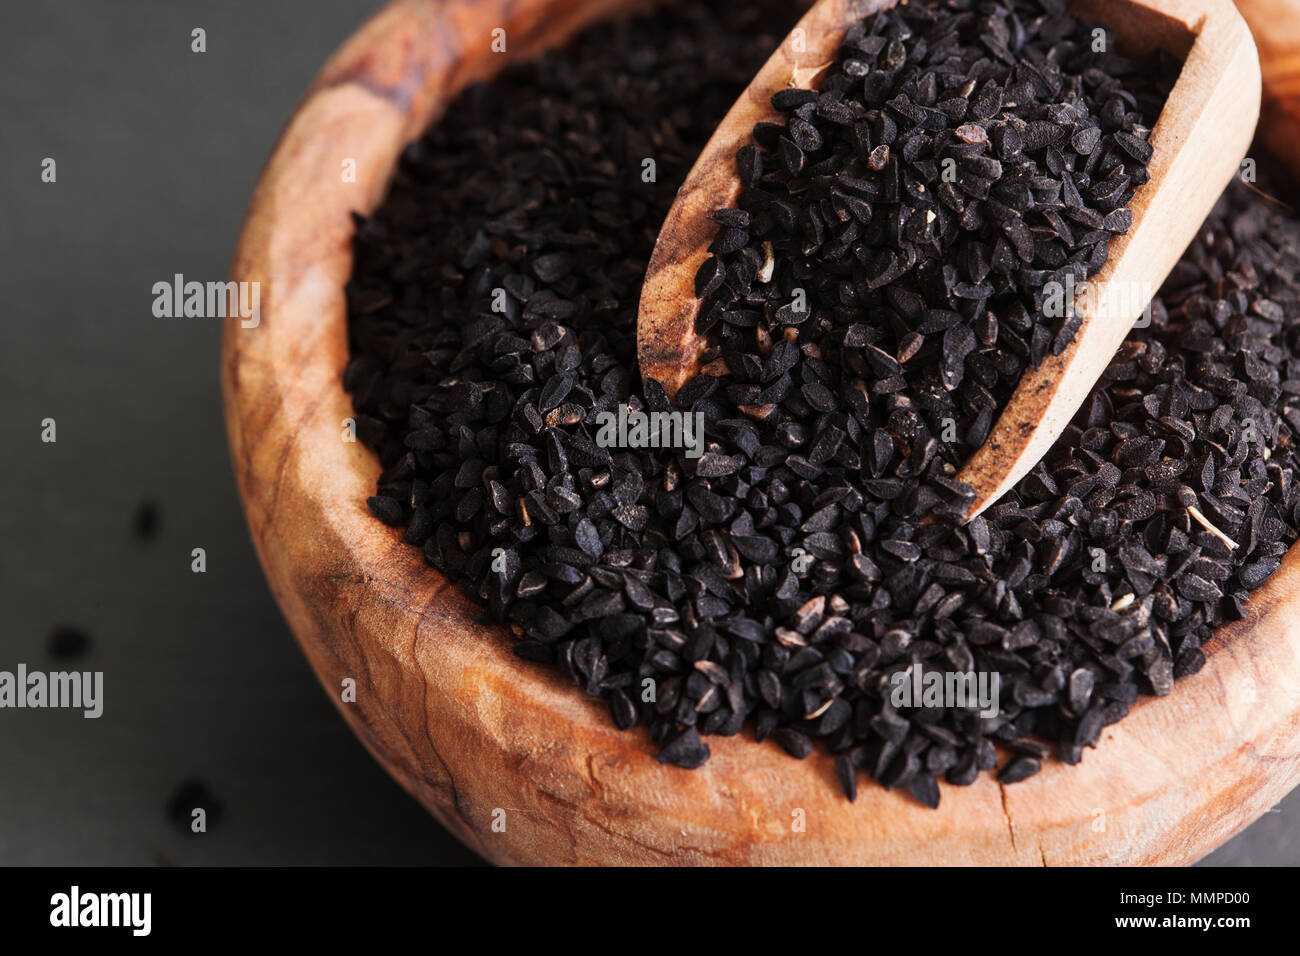 Black cumin or nigella sativa or kalonji seeds in bowl with spoon on black slate background, selective focus Stock Photo